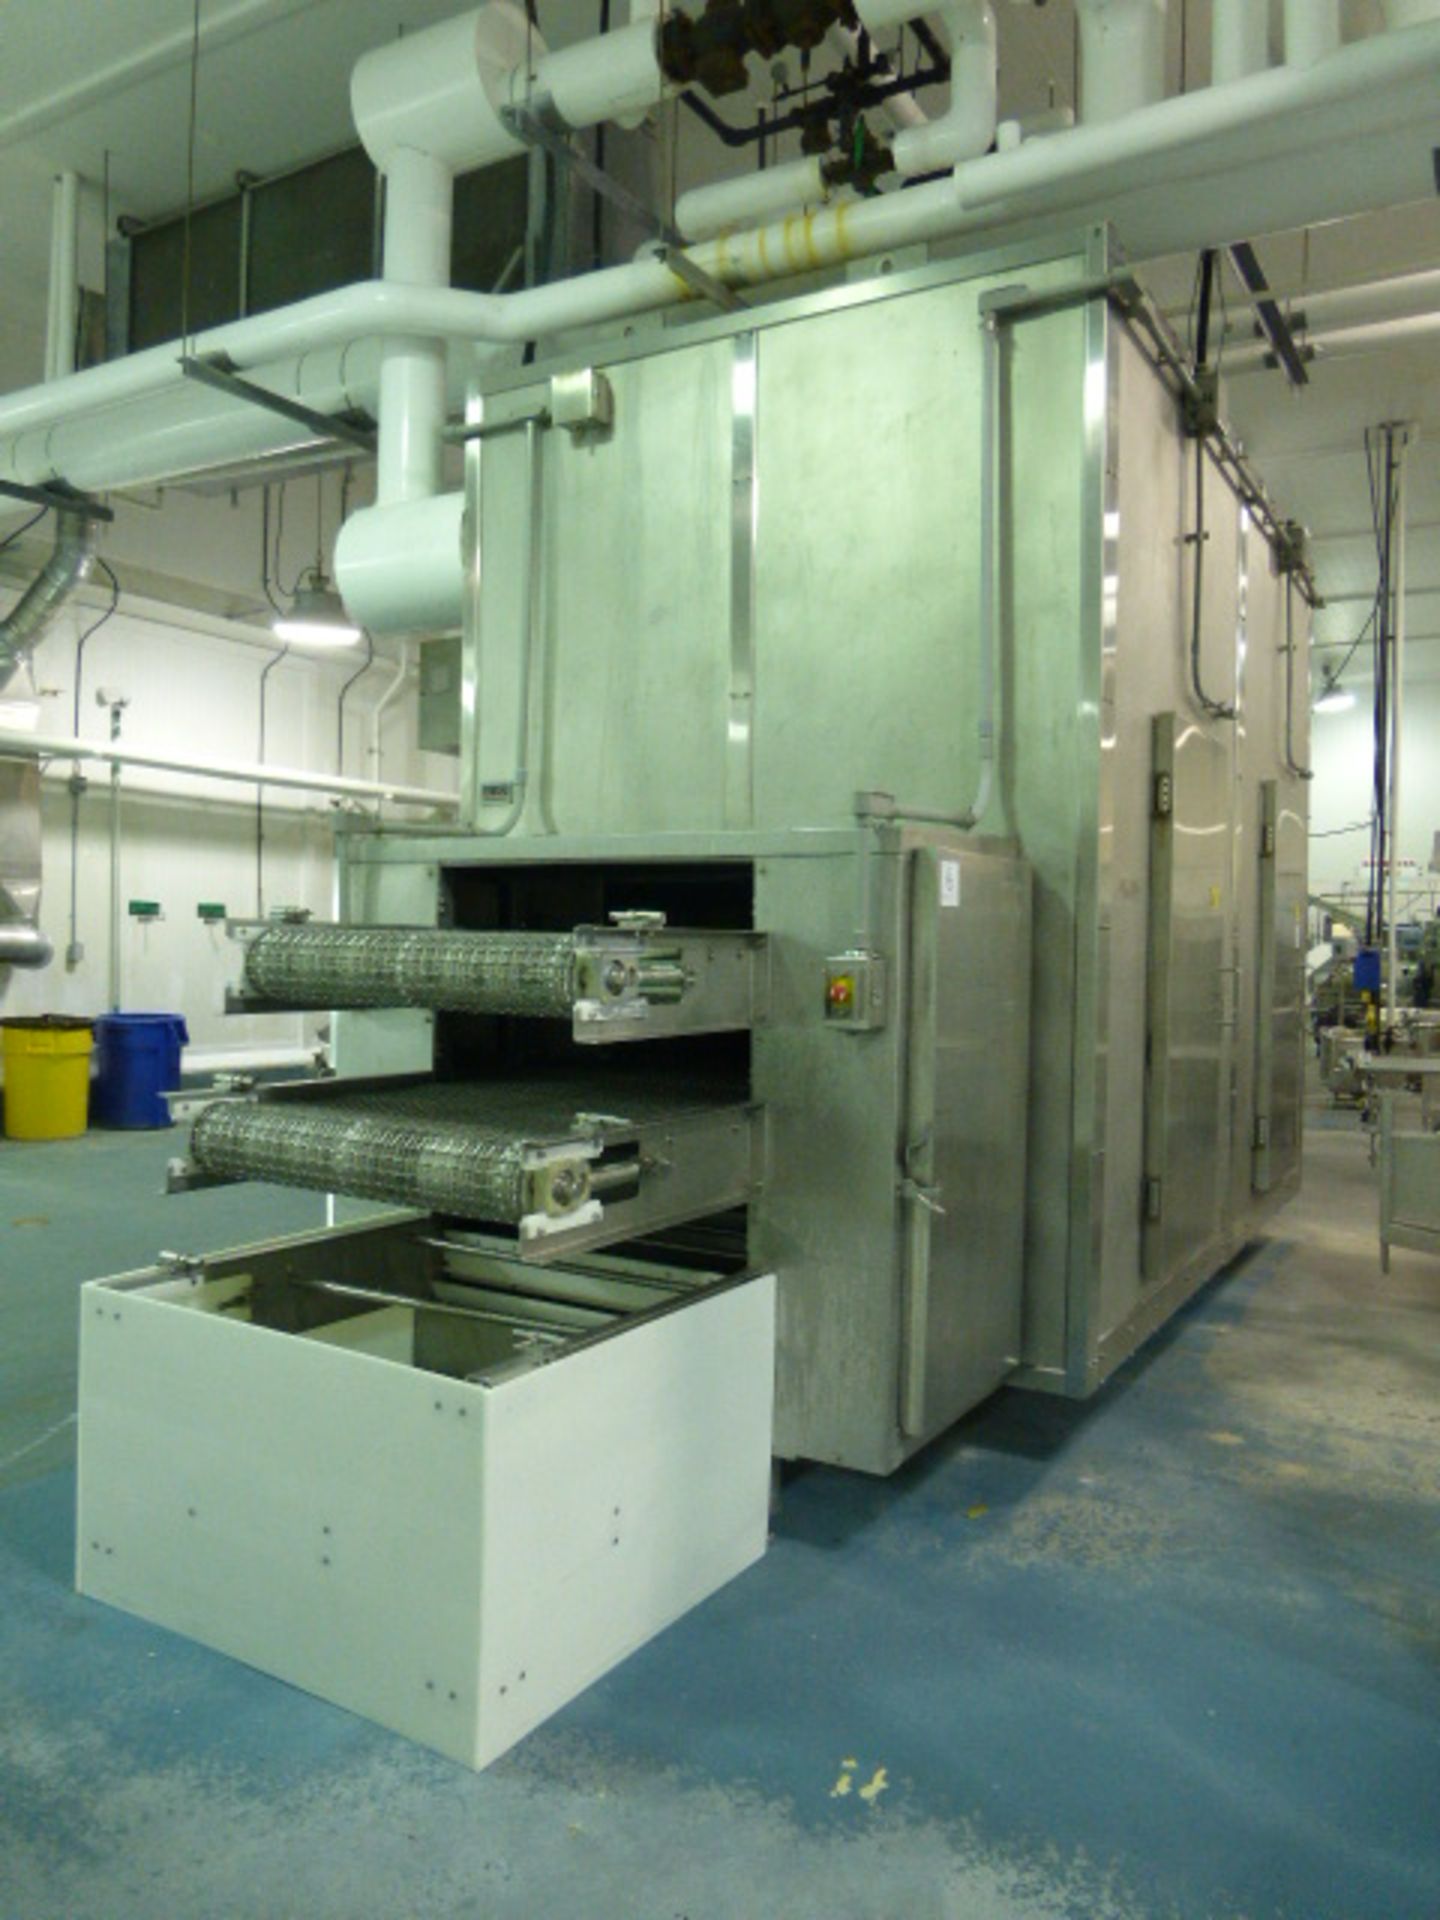 Ross boundary layer control tunnel freezer/chiller, model BLC-II, ammonia, independent tunnel - Image 4 of 11